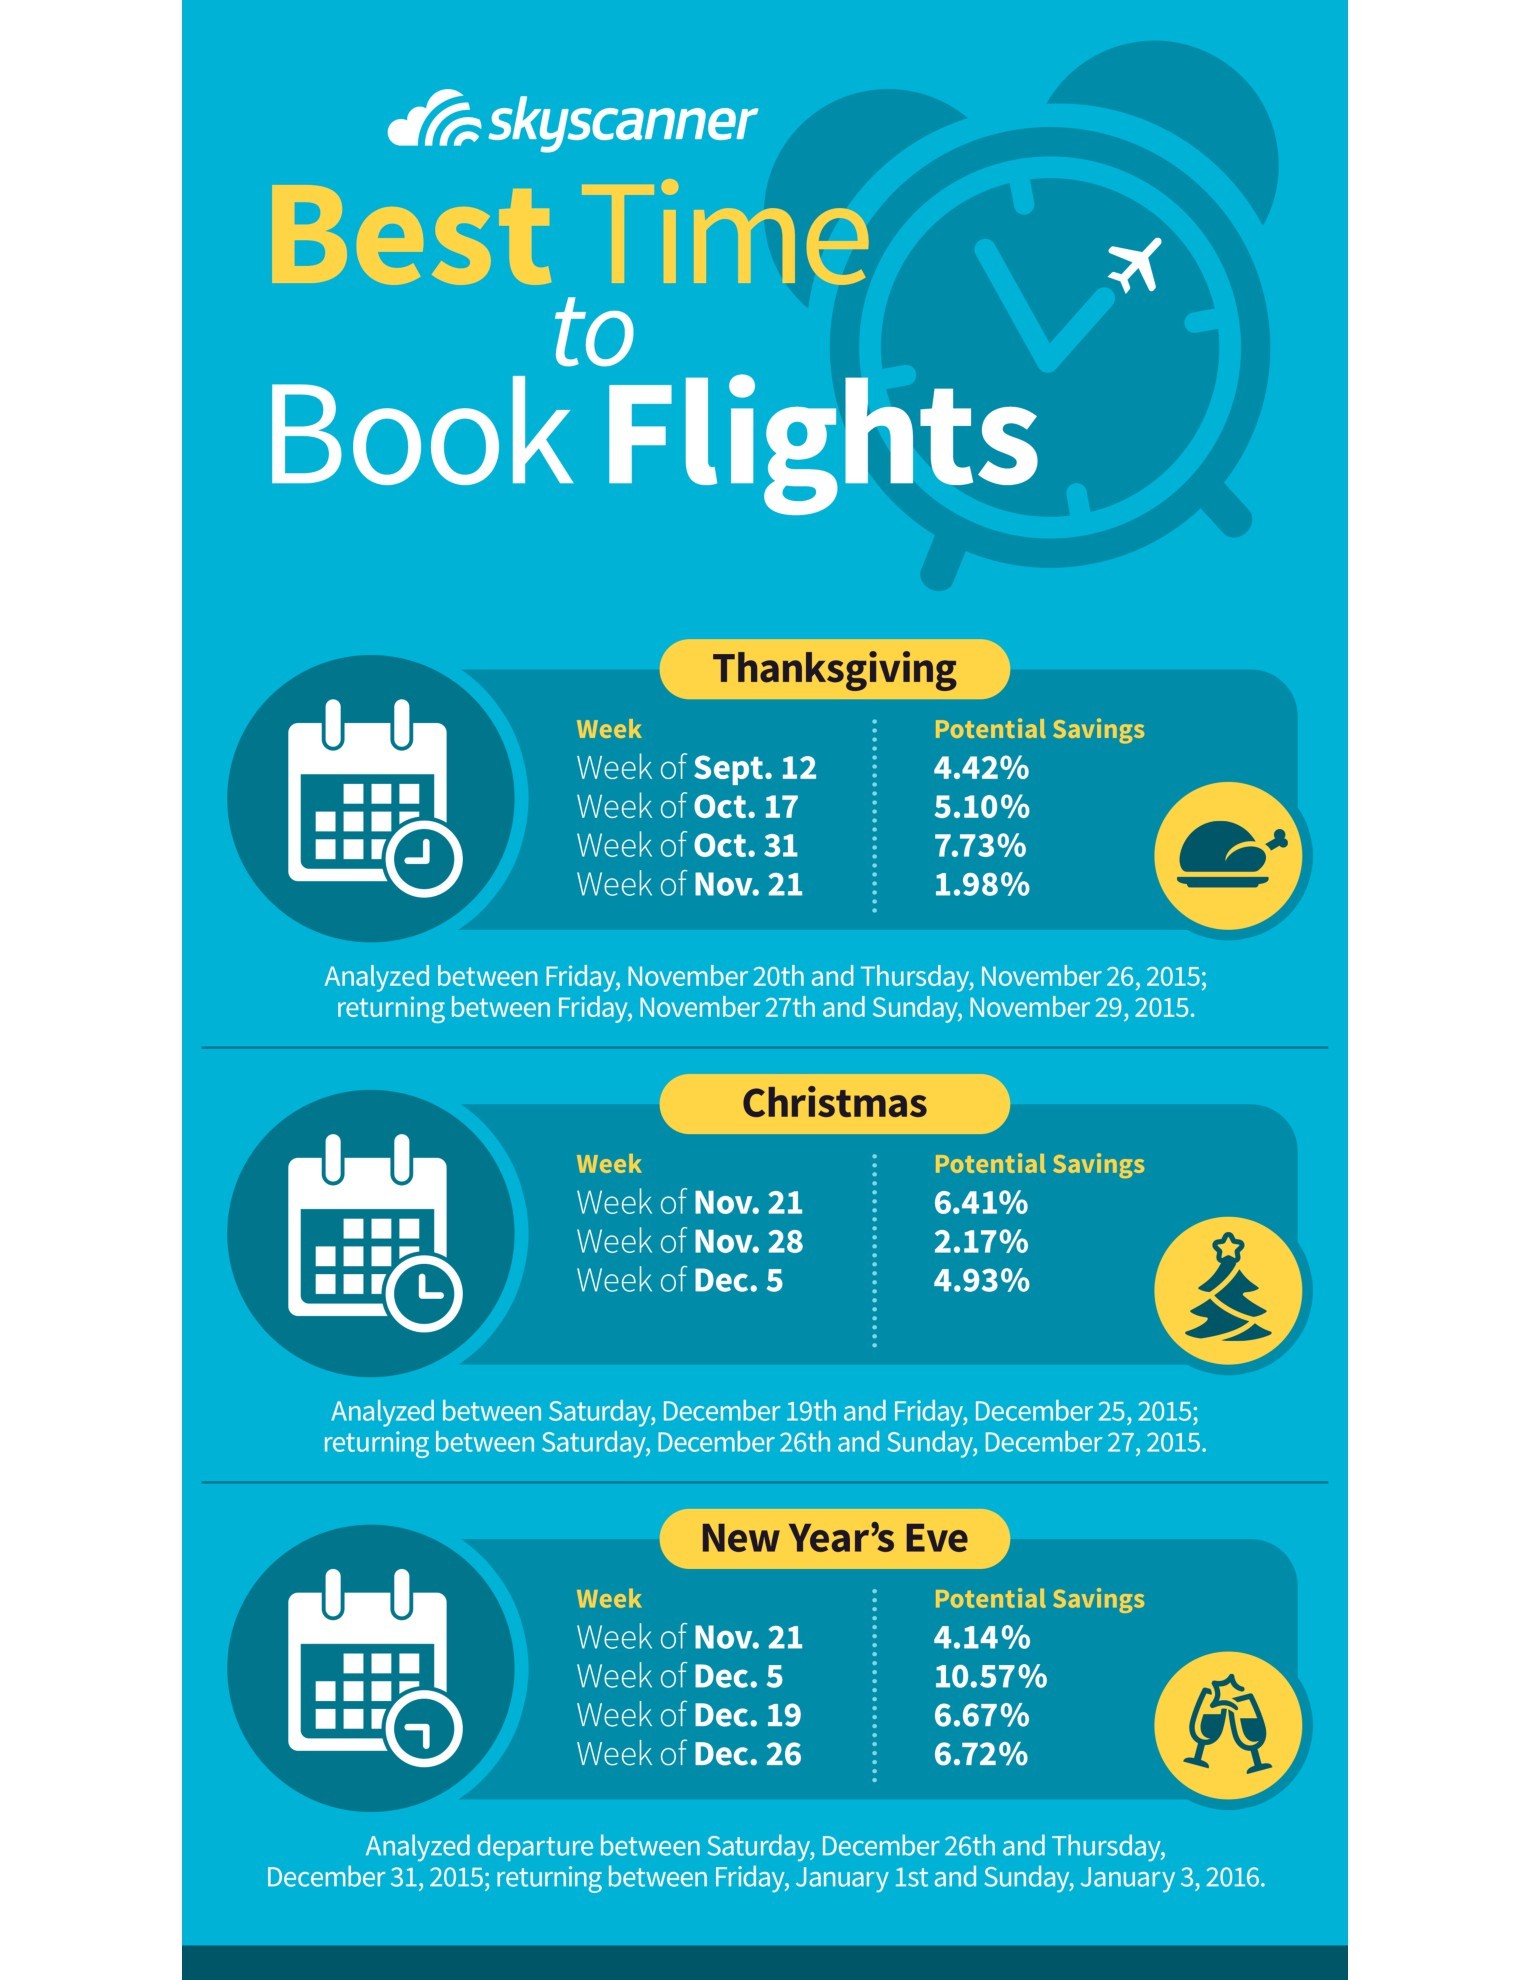 When is the Best Time to Buy Holiday Flights